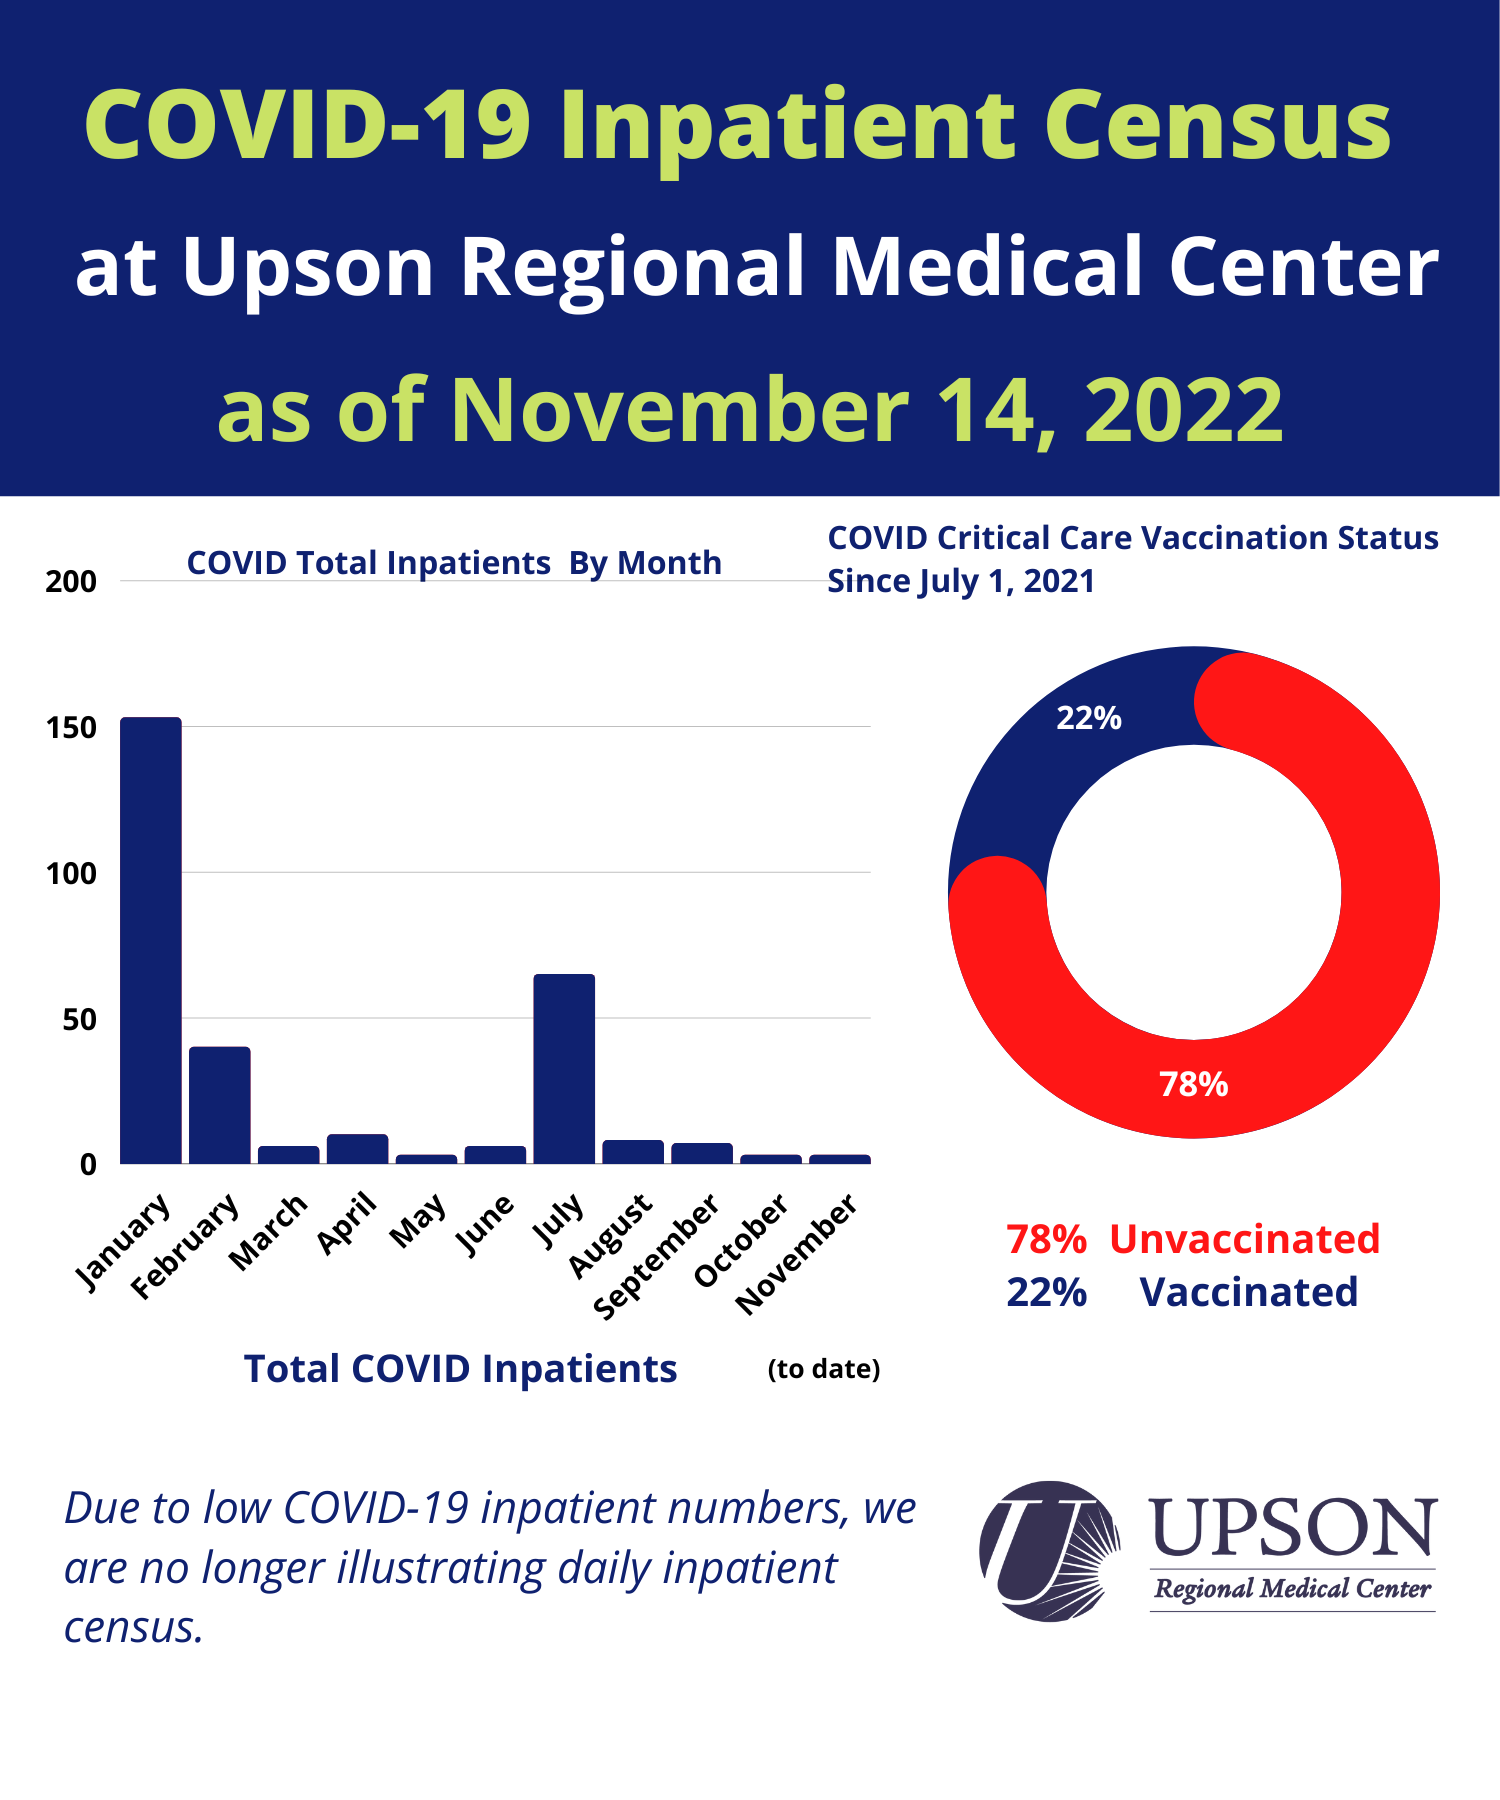 Photo for URMC COVID-19 inpatient status as of November 14, 2022.